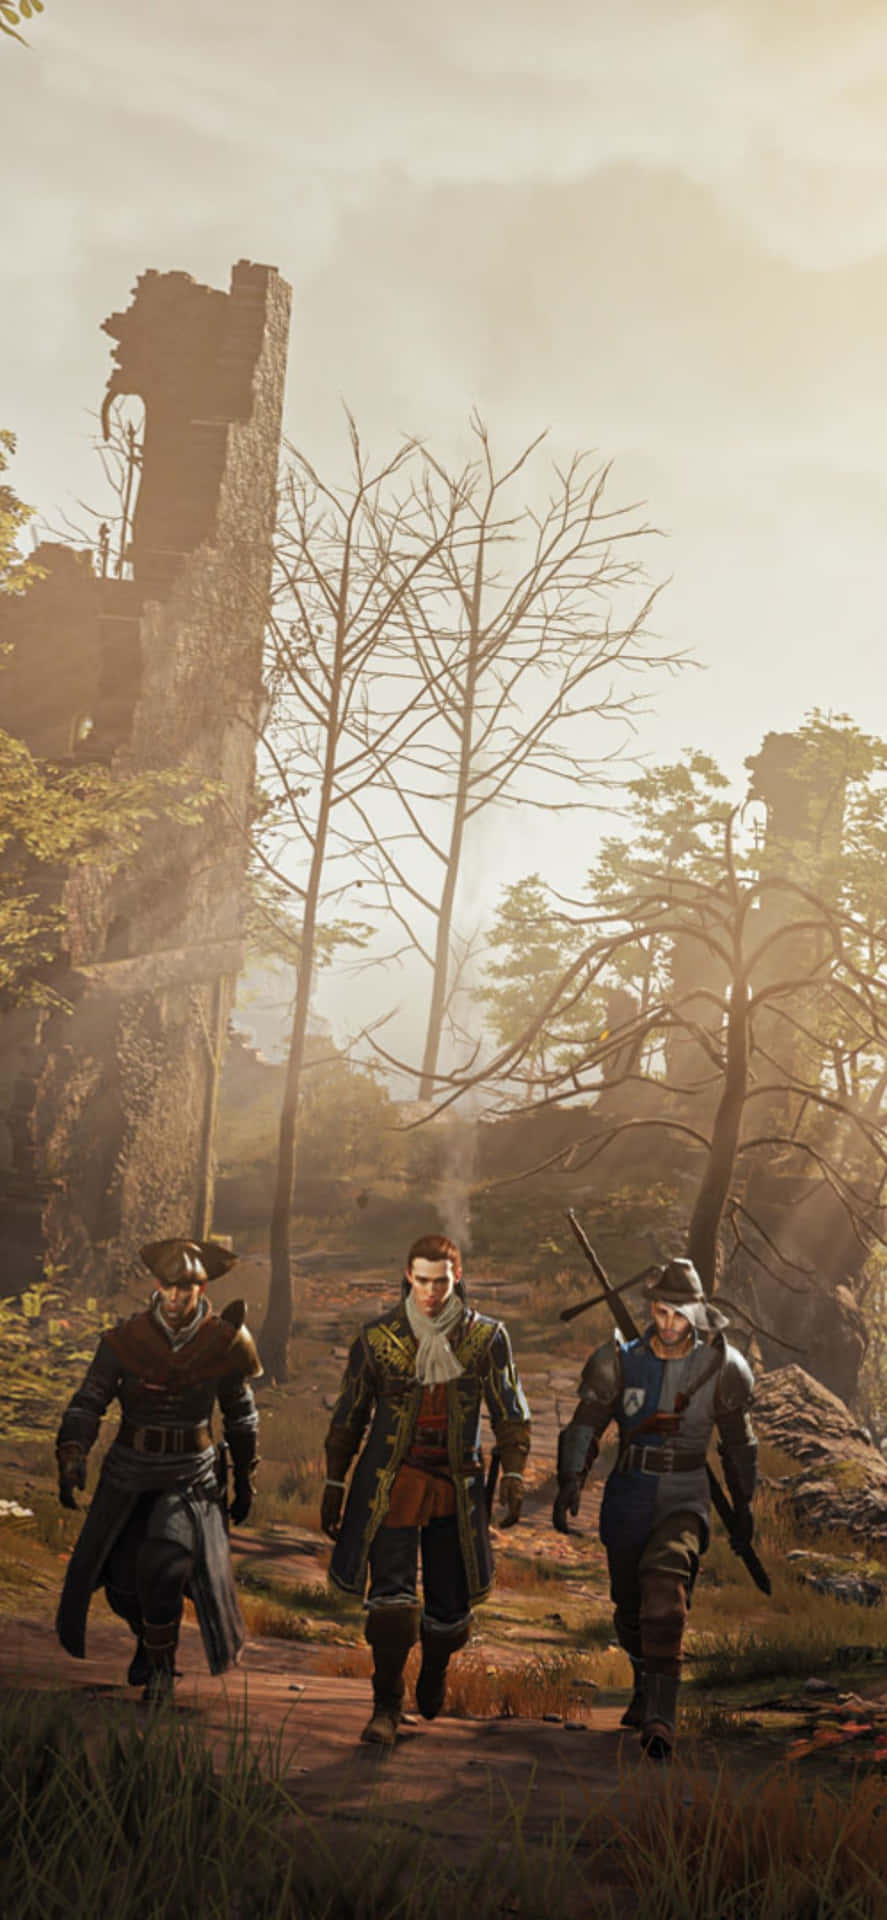 Vintage aesthetic with a modern twist in Greedfall